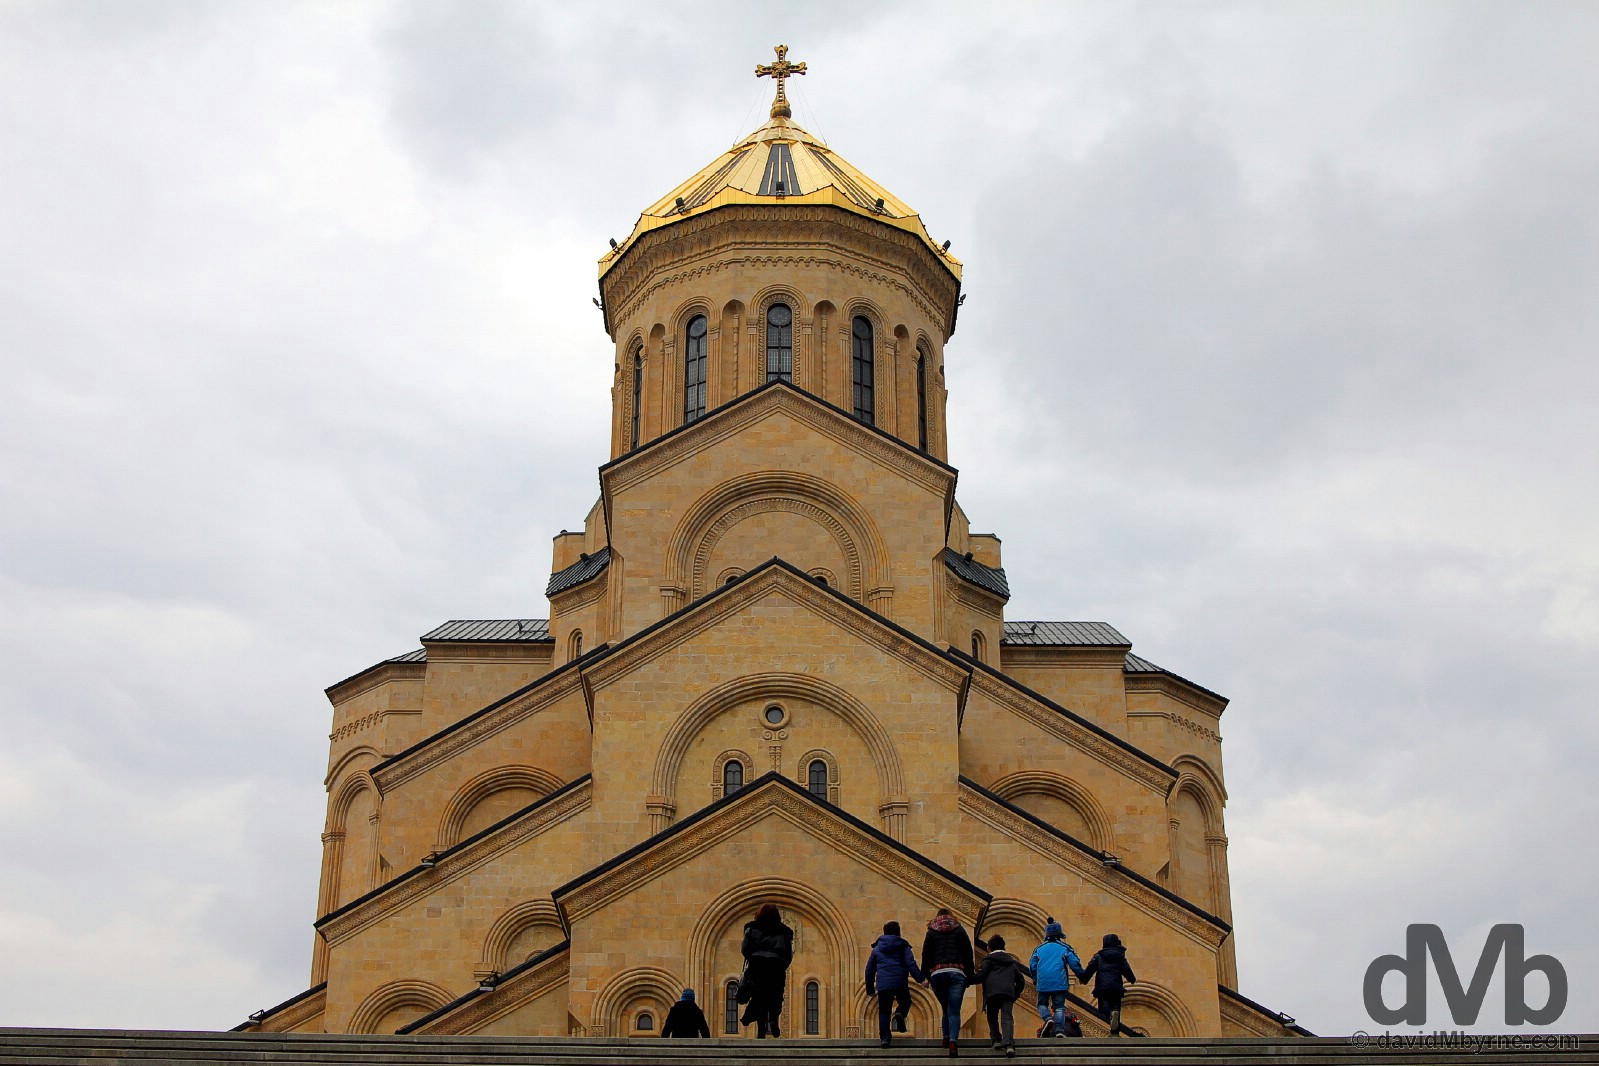 Climbing the steps fronting the massive Tsminda Sameba Cathedral in Tbilisi, Georgia. March 19, 2015.